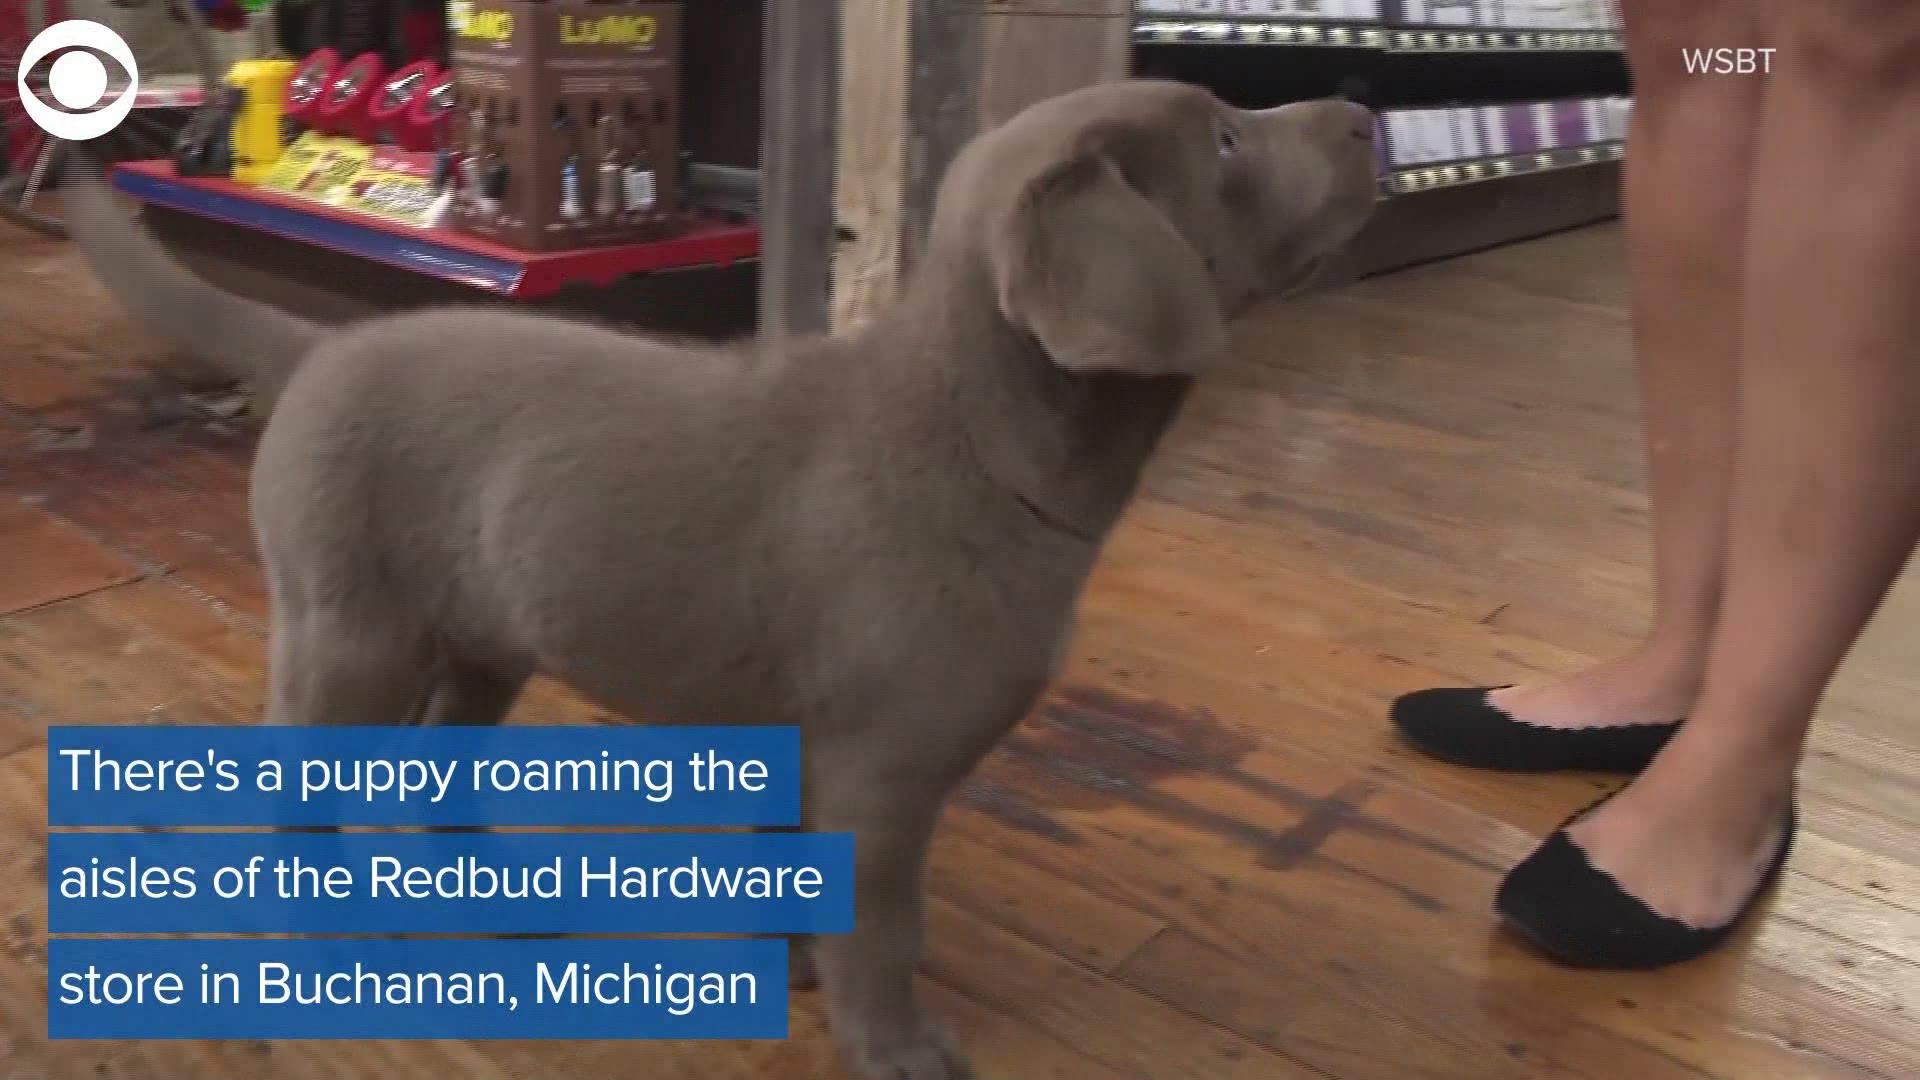 After a Michigan hardware store lost its beloved "shop dog," the owners knew they needed to do something about the emptiness the community felt. Meet "Peat," Redbud Hardware's newest canine employee.